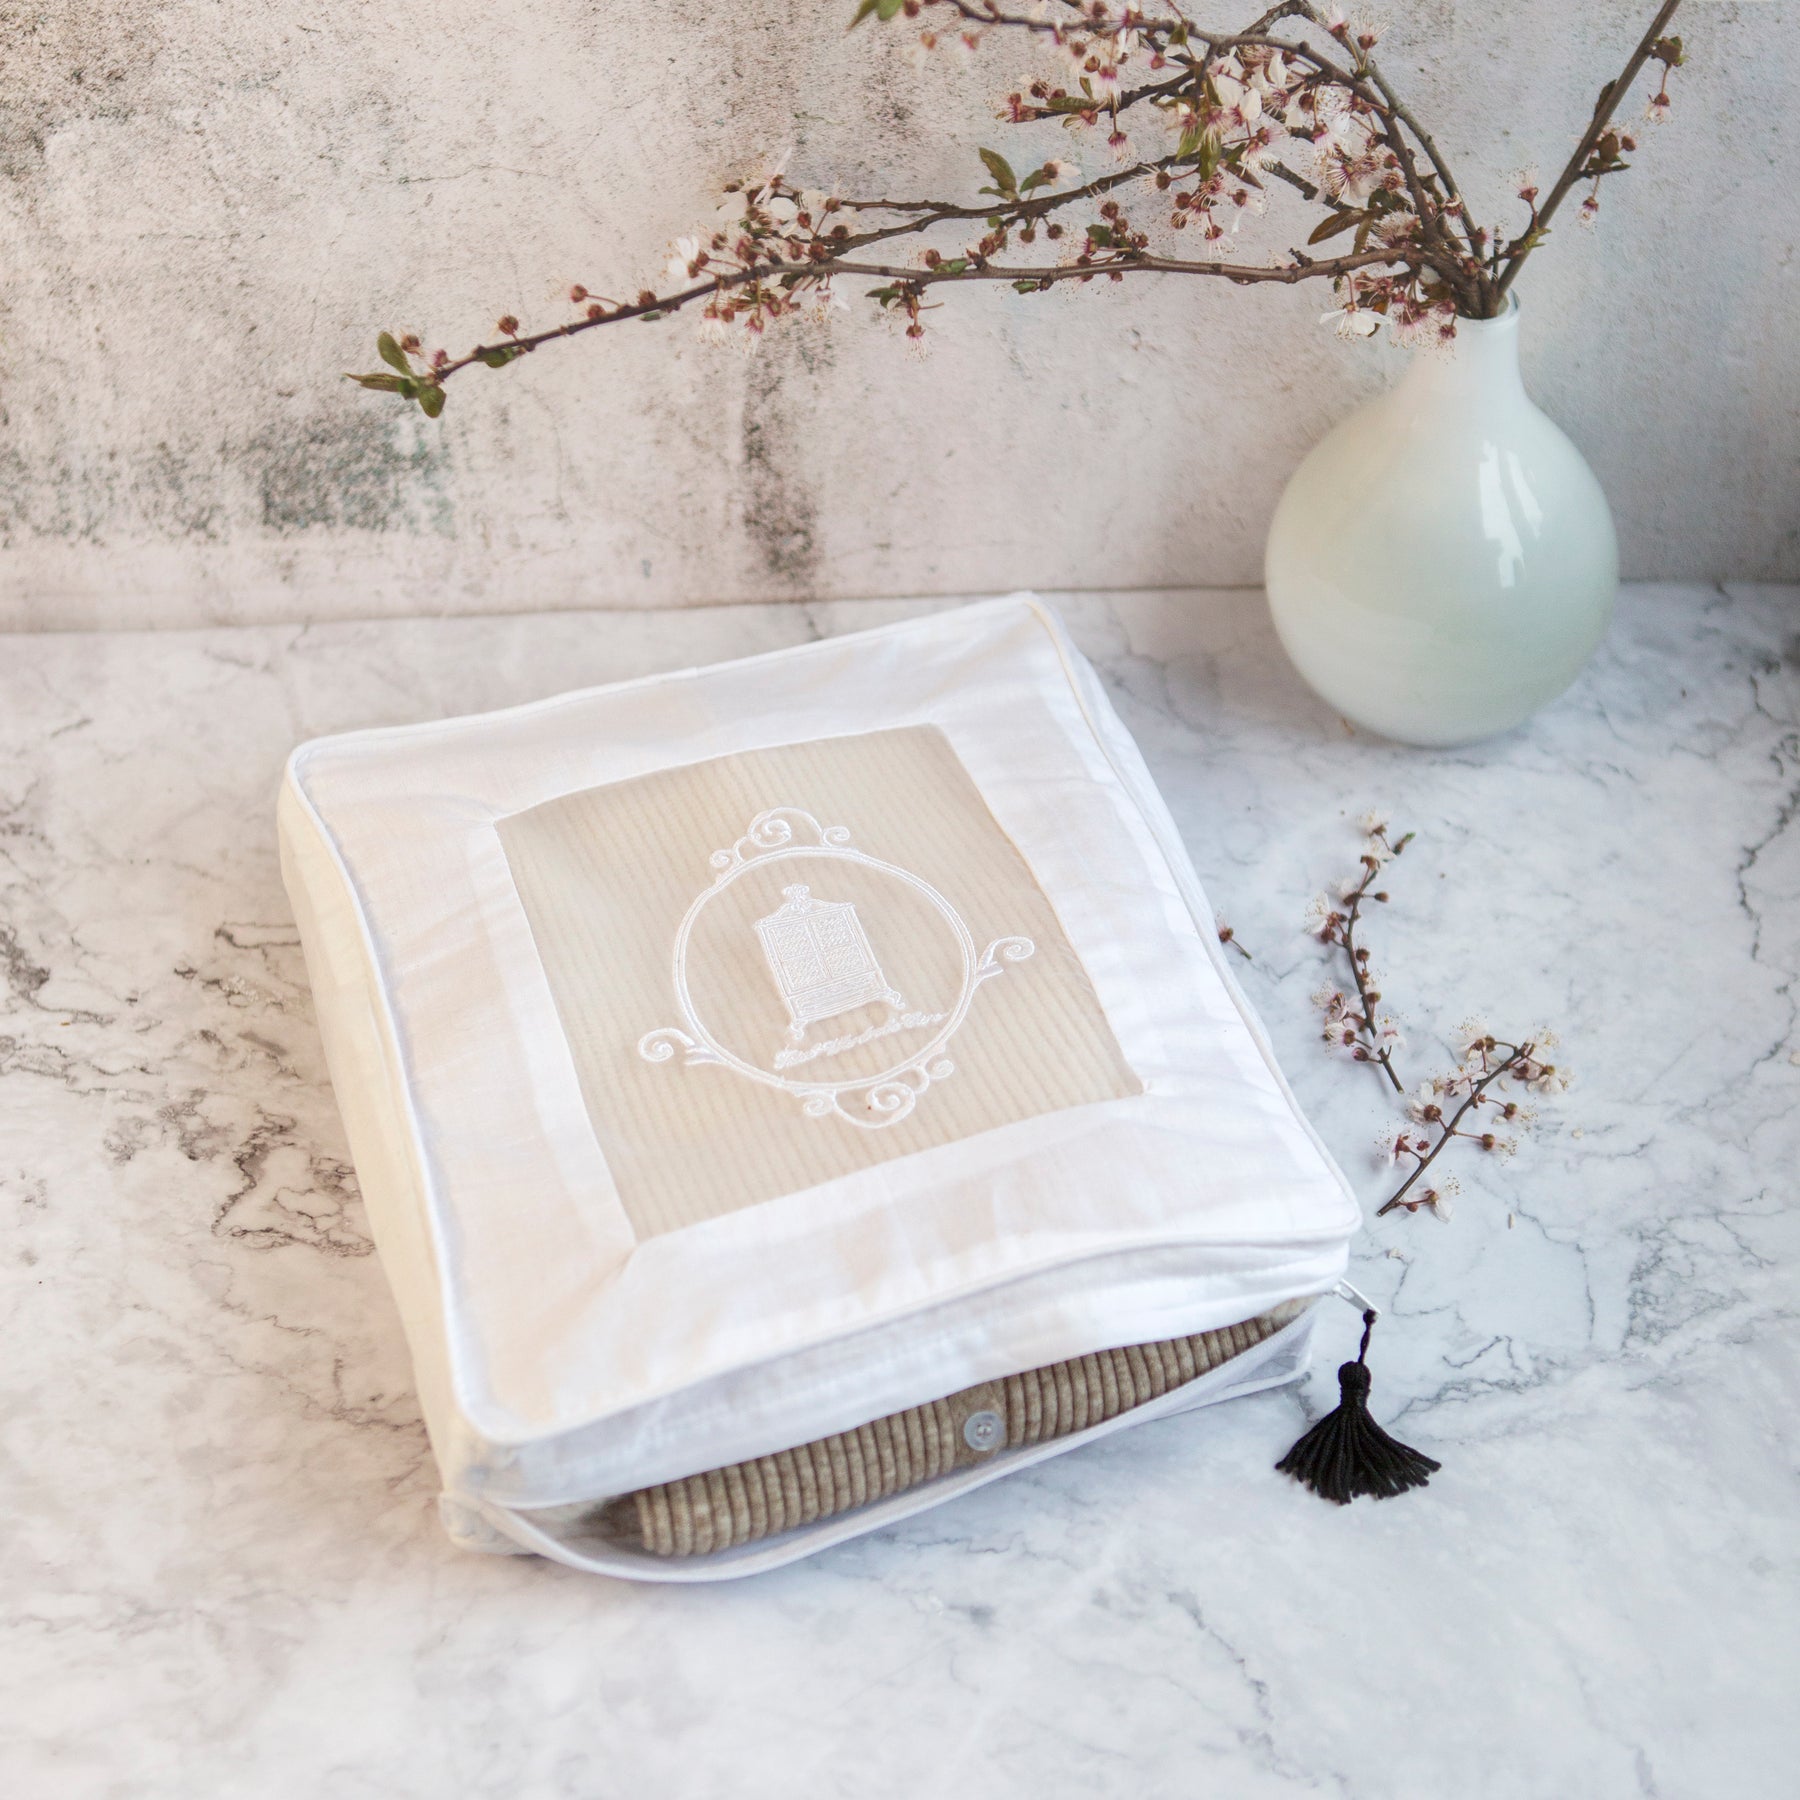 Cashmere storage bag on marble surface with black tassel and cherry blossoms to reverse